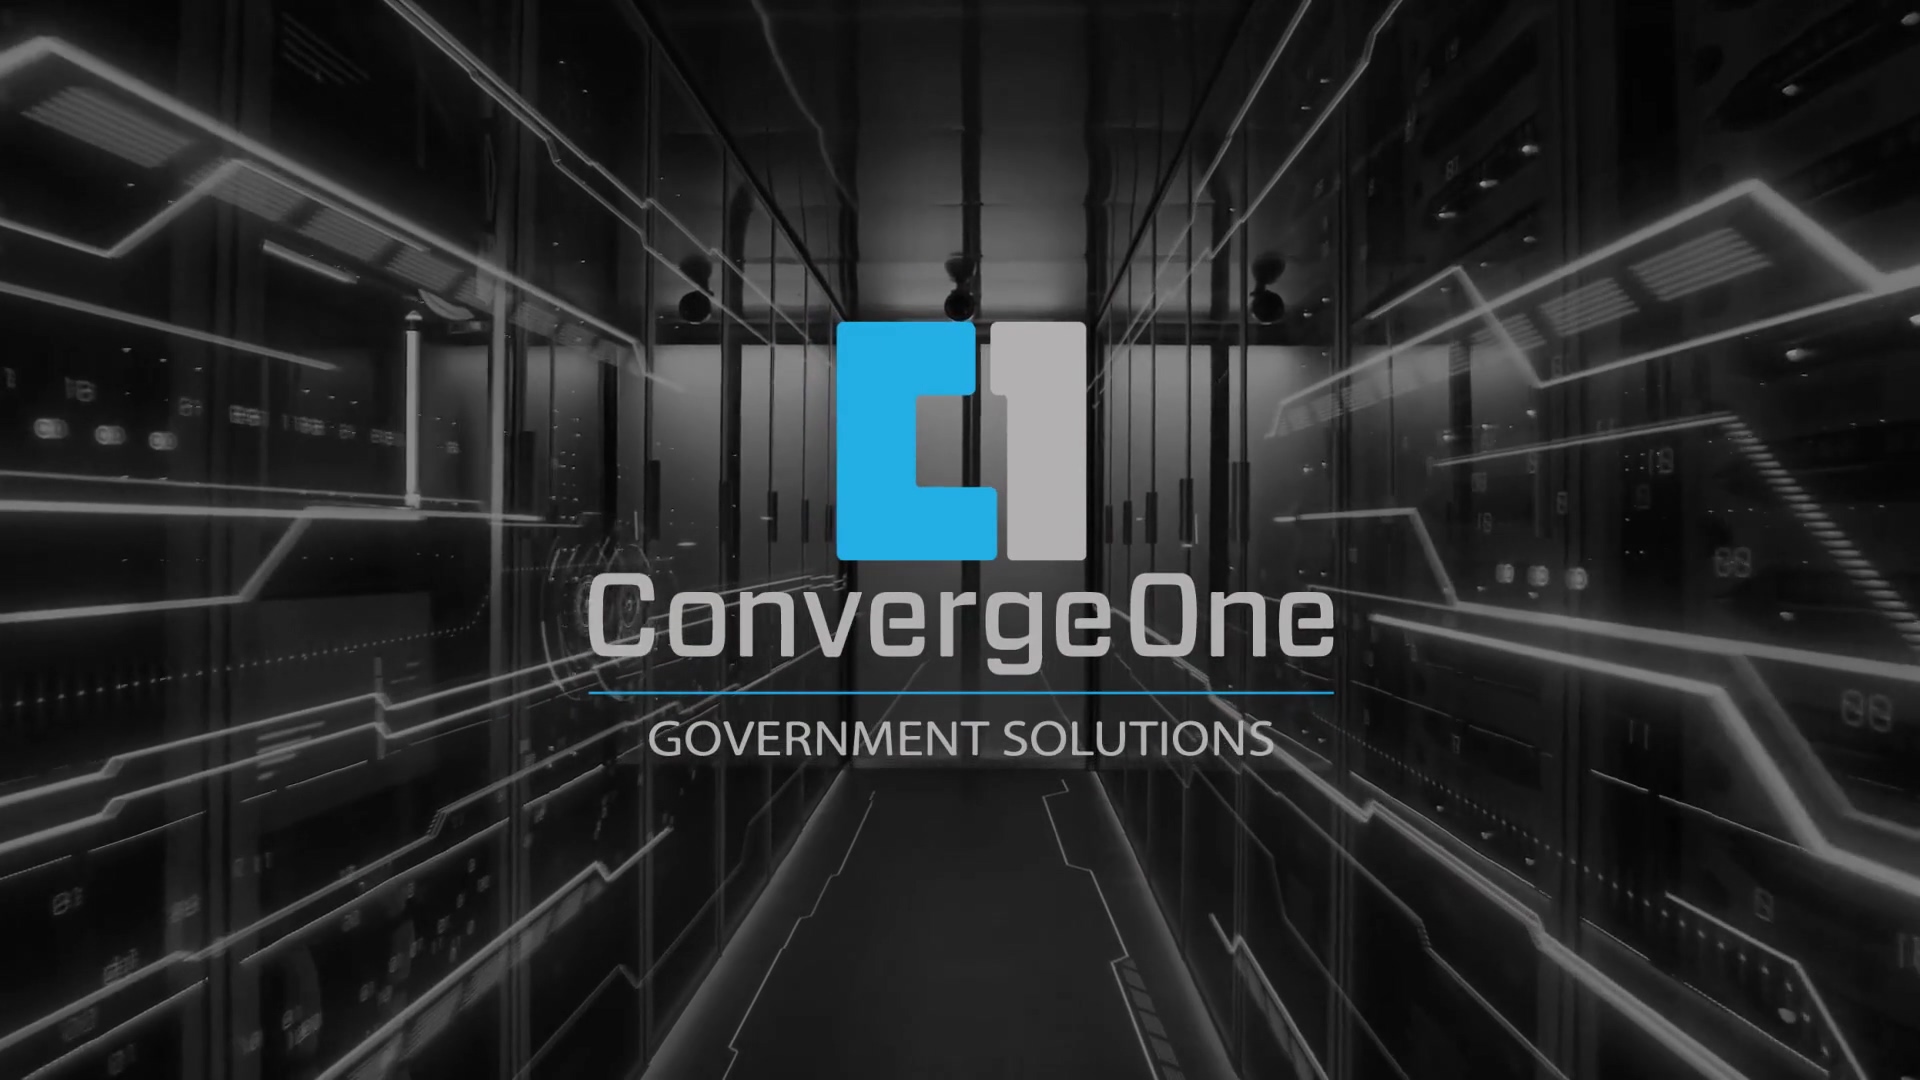 ConvergeOne Government Solutions - Main Sizzle Reel